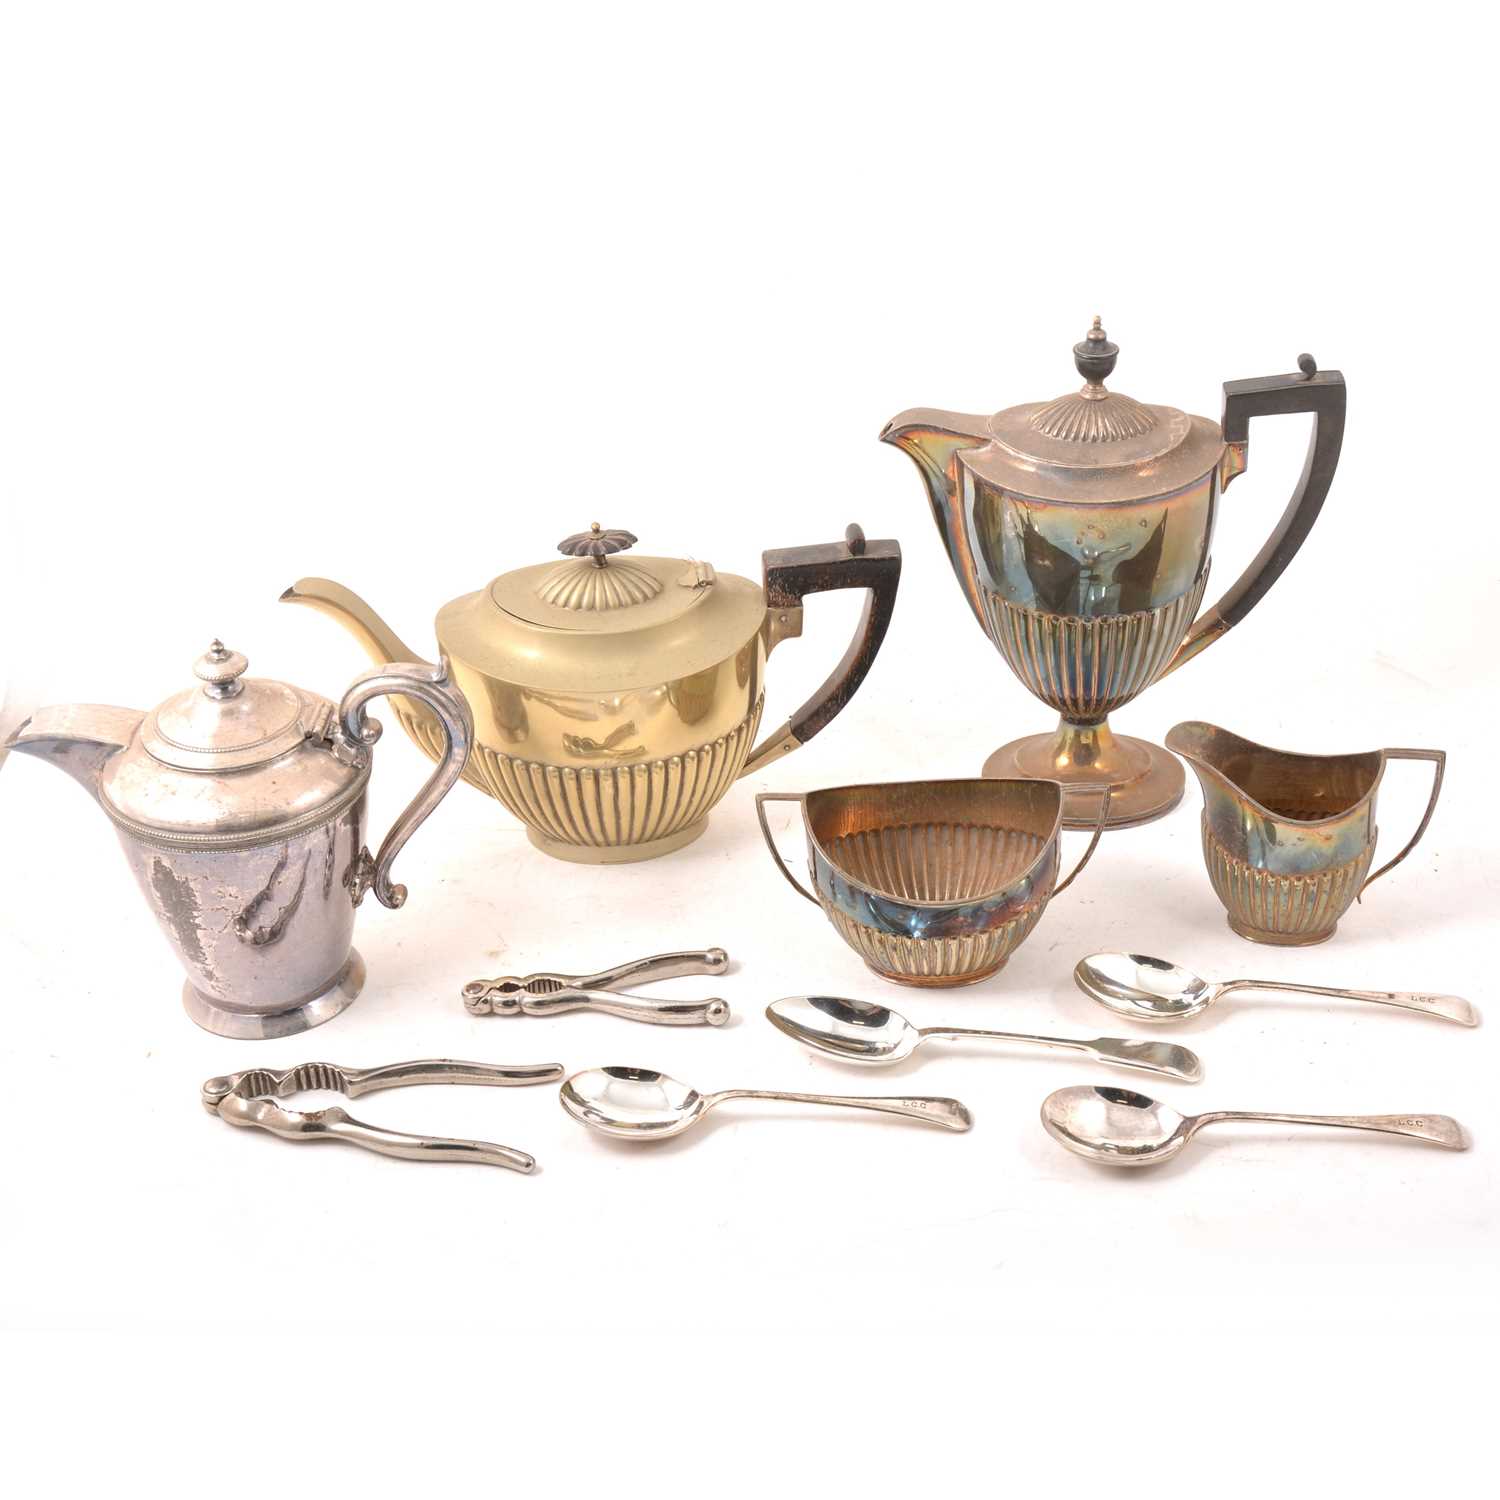 Lot 137 - An electroplated four-piece tea and coffee set, plus plated and stainless steel cutlery